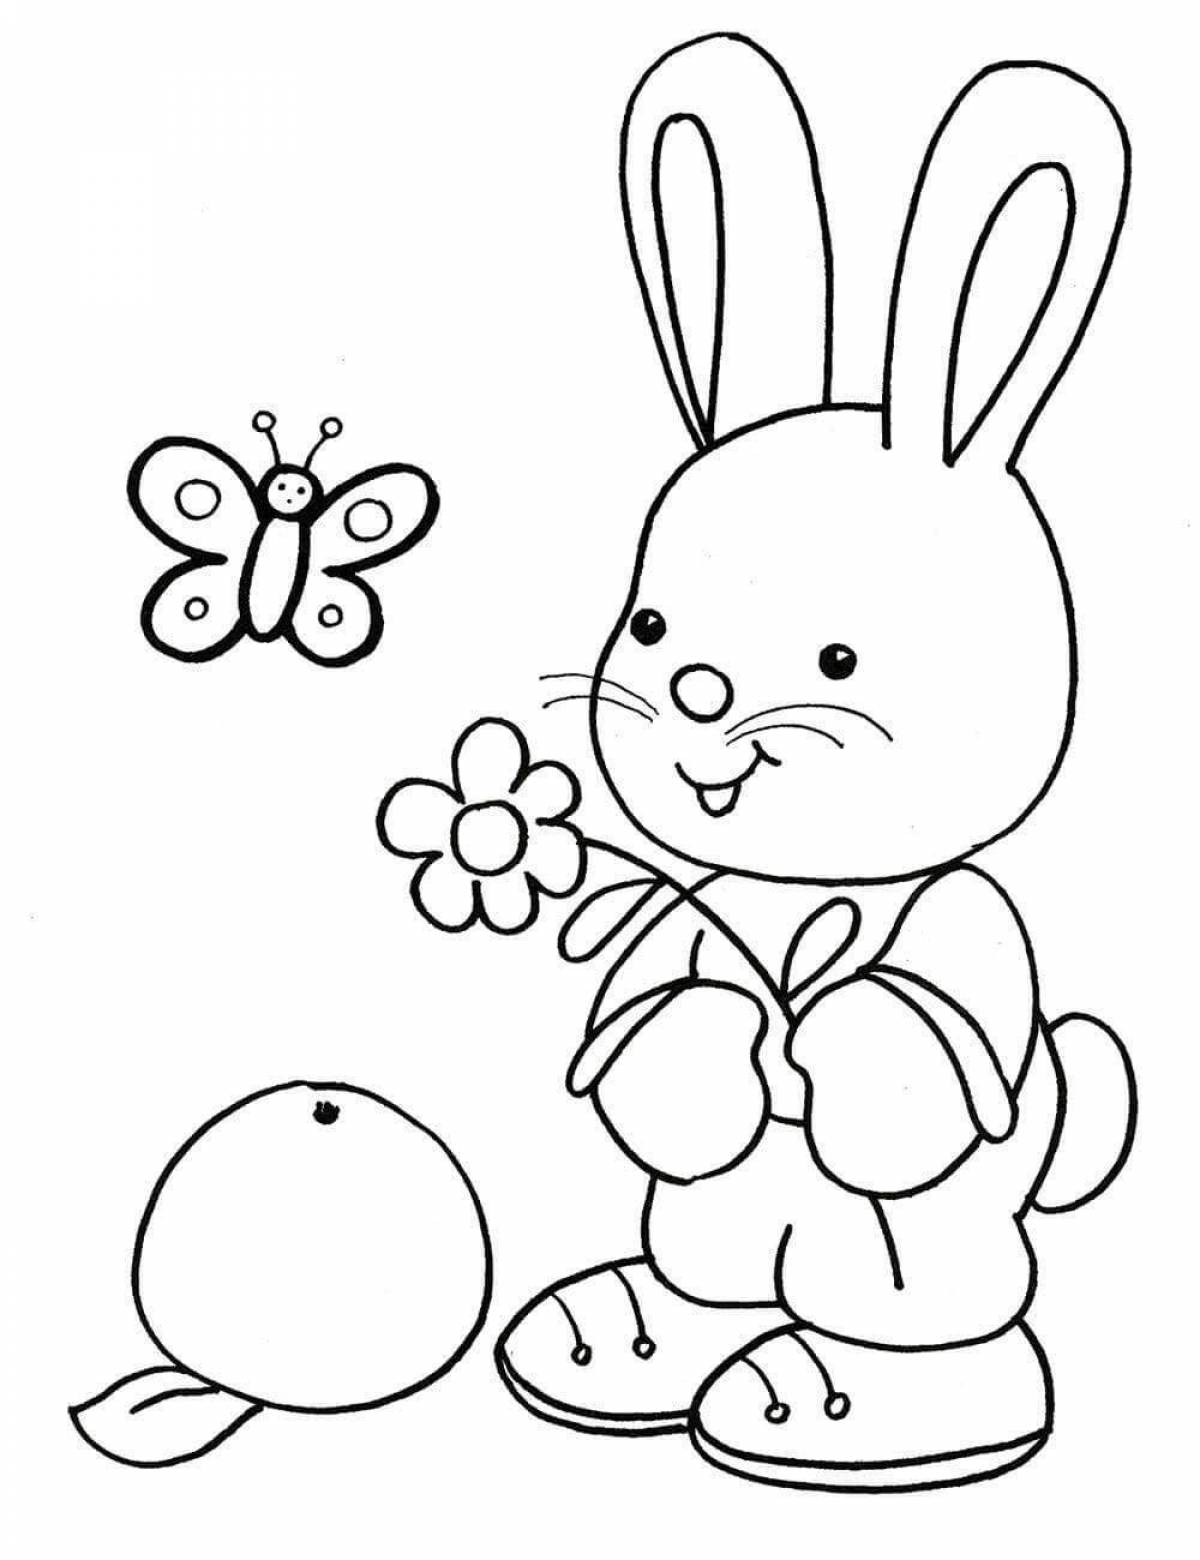 Color-frenzy coloring page for children 3-4 years old